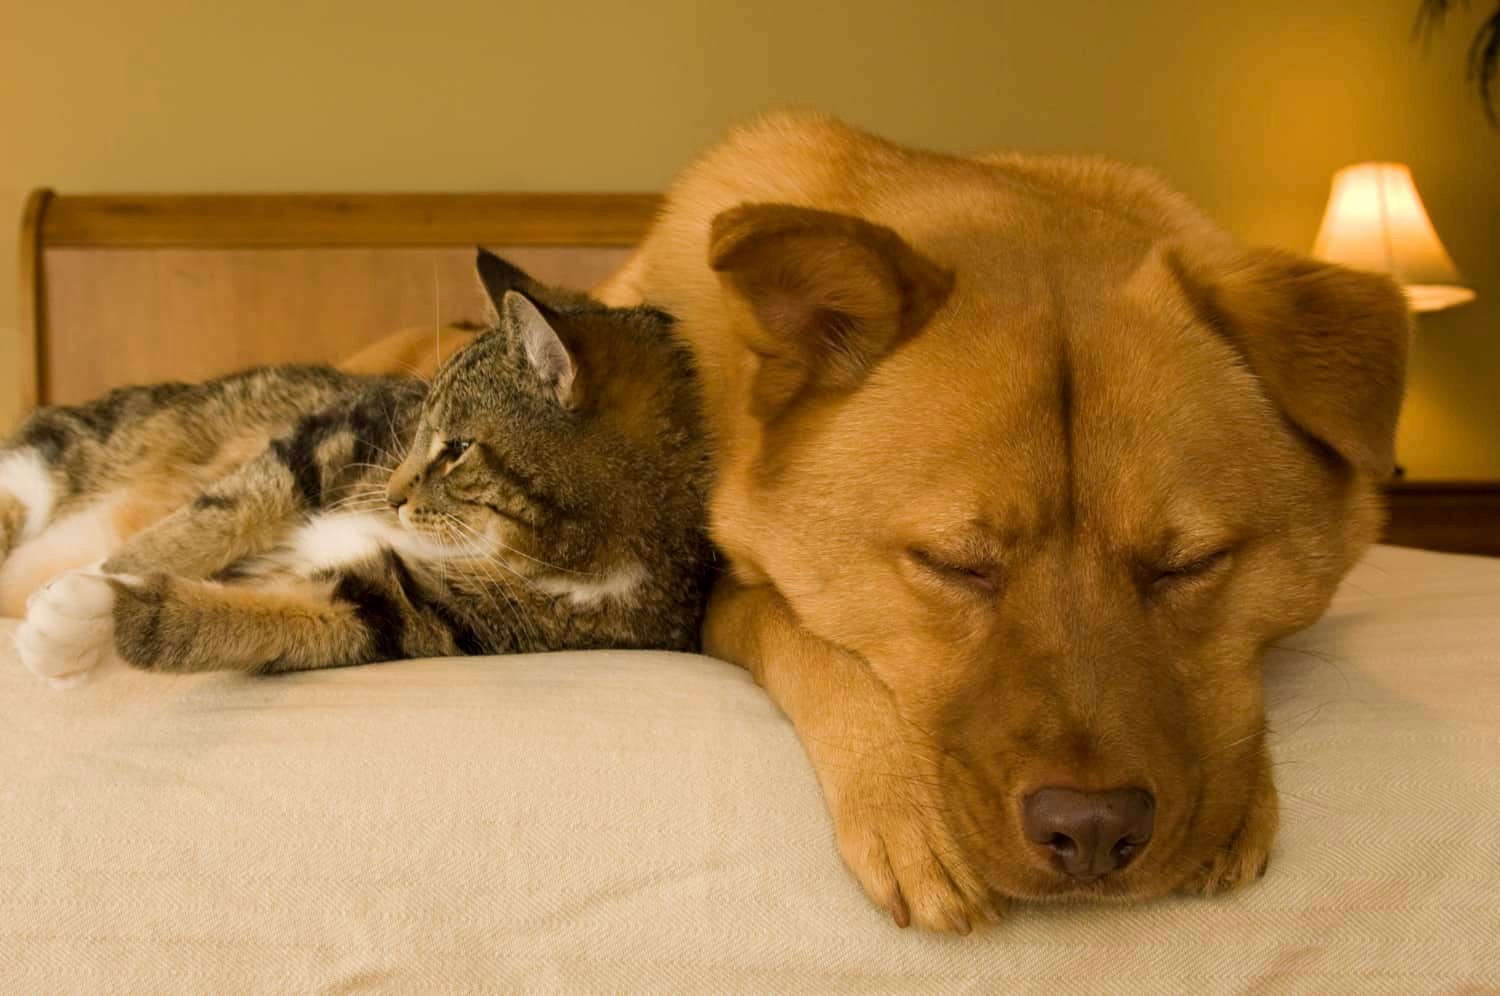 Cat and Dog Sleeping on Bed - Pet Travel Hacks To Save You Money